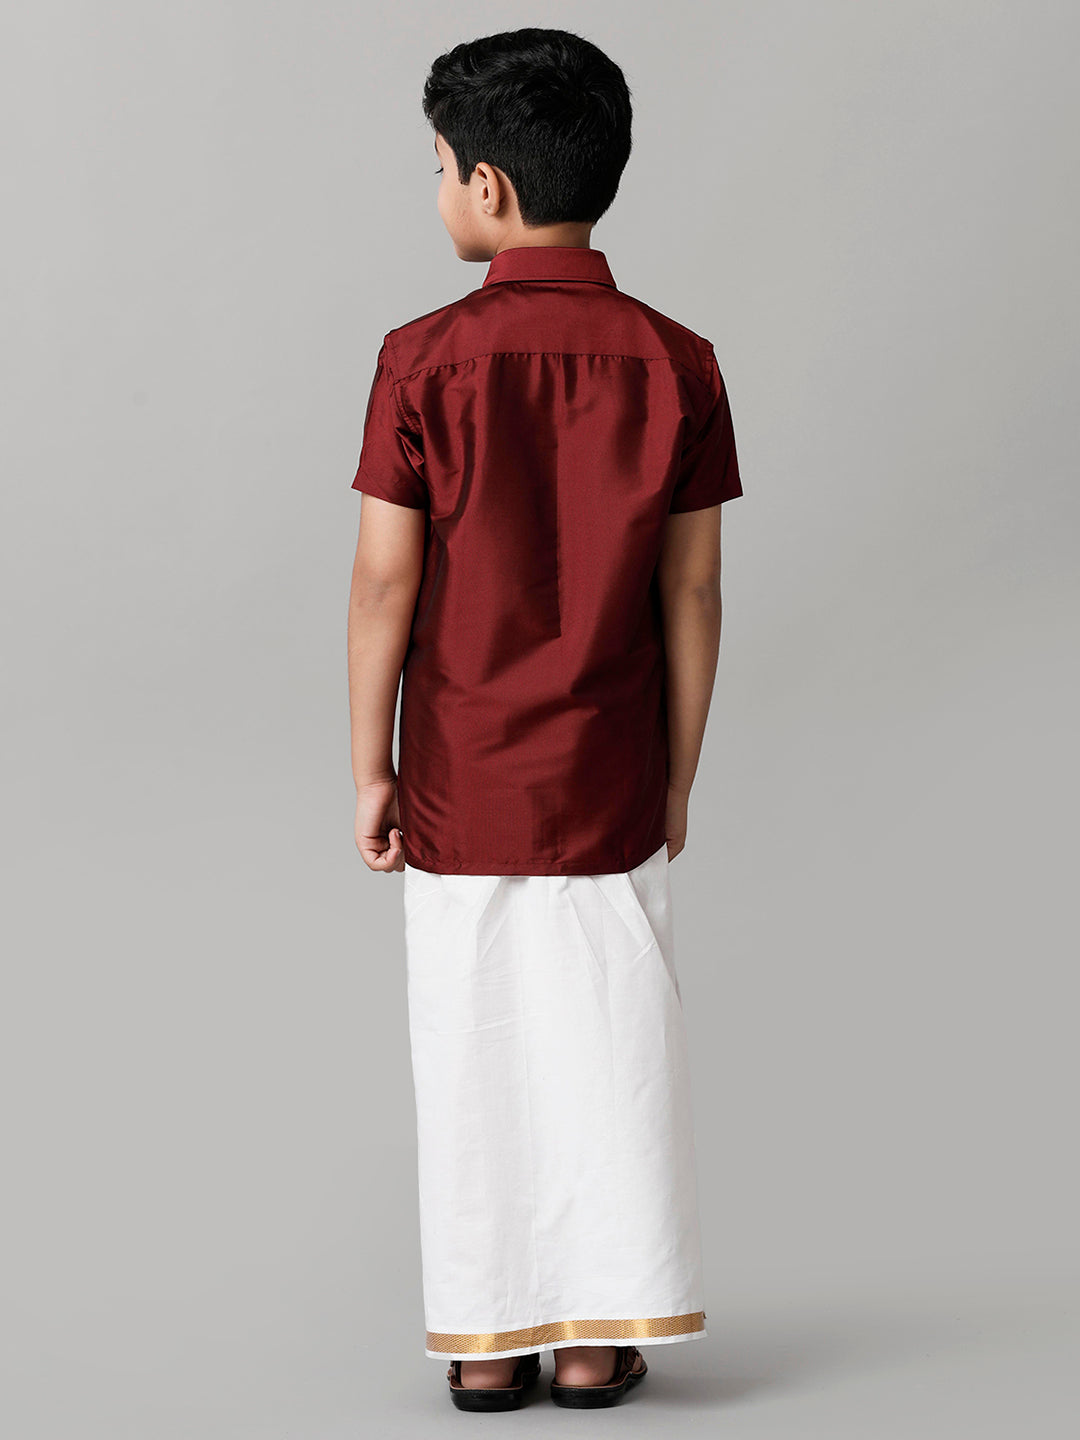 Boys Silk Cotton Maroon Half Sleeves Shirt with Adjustable White Dhoti Combo K7-Back view